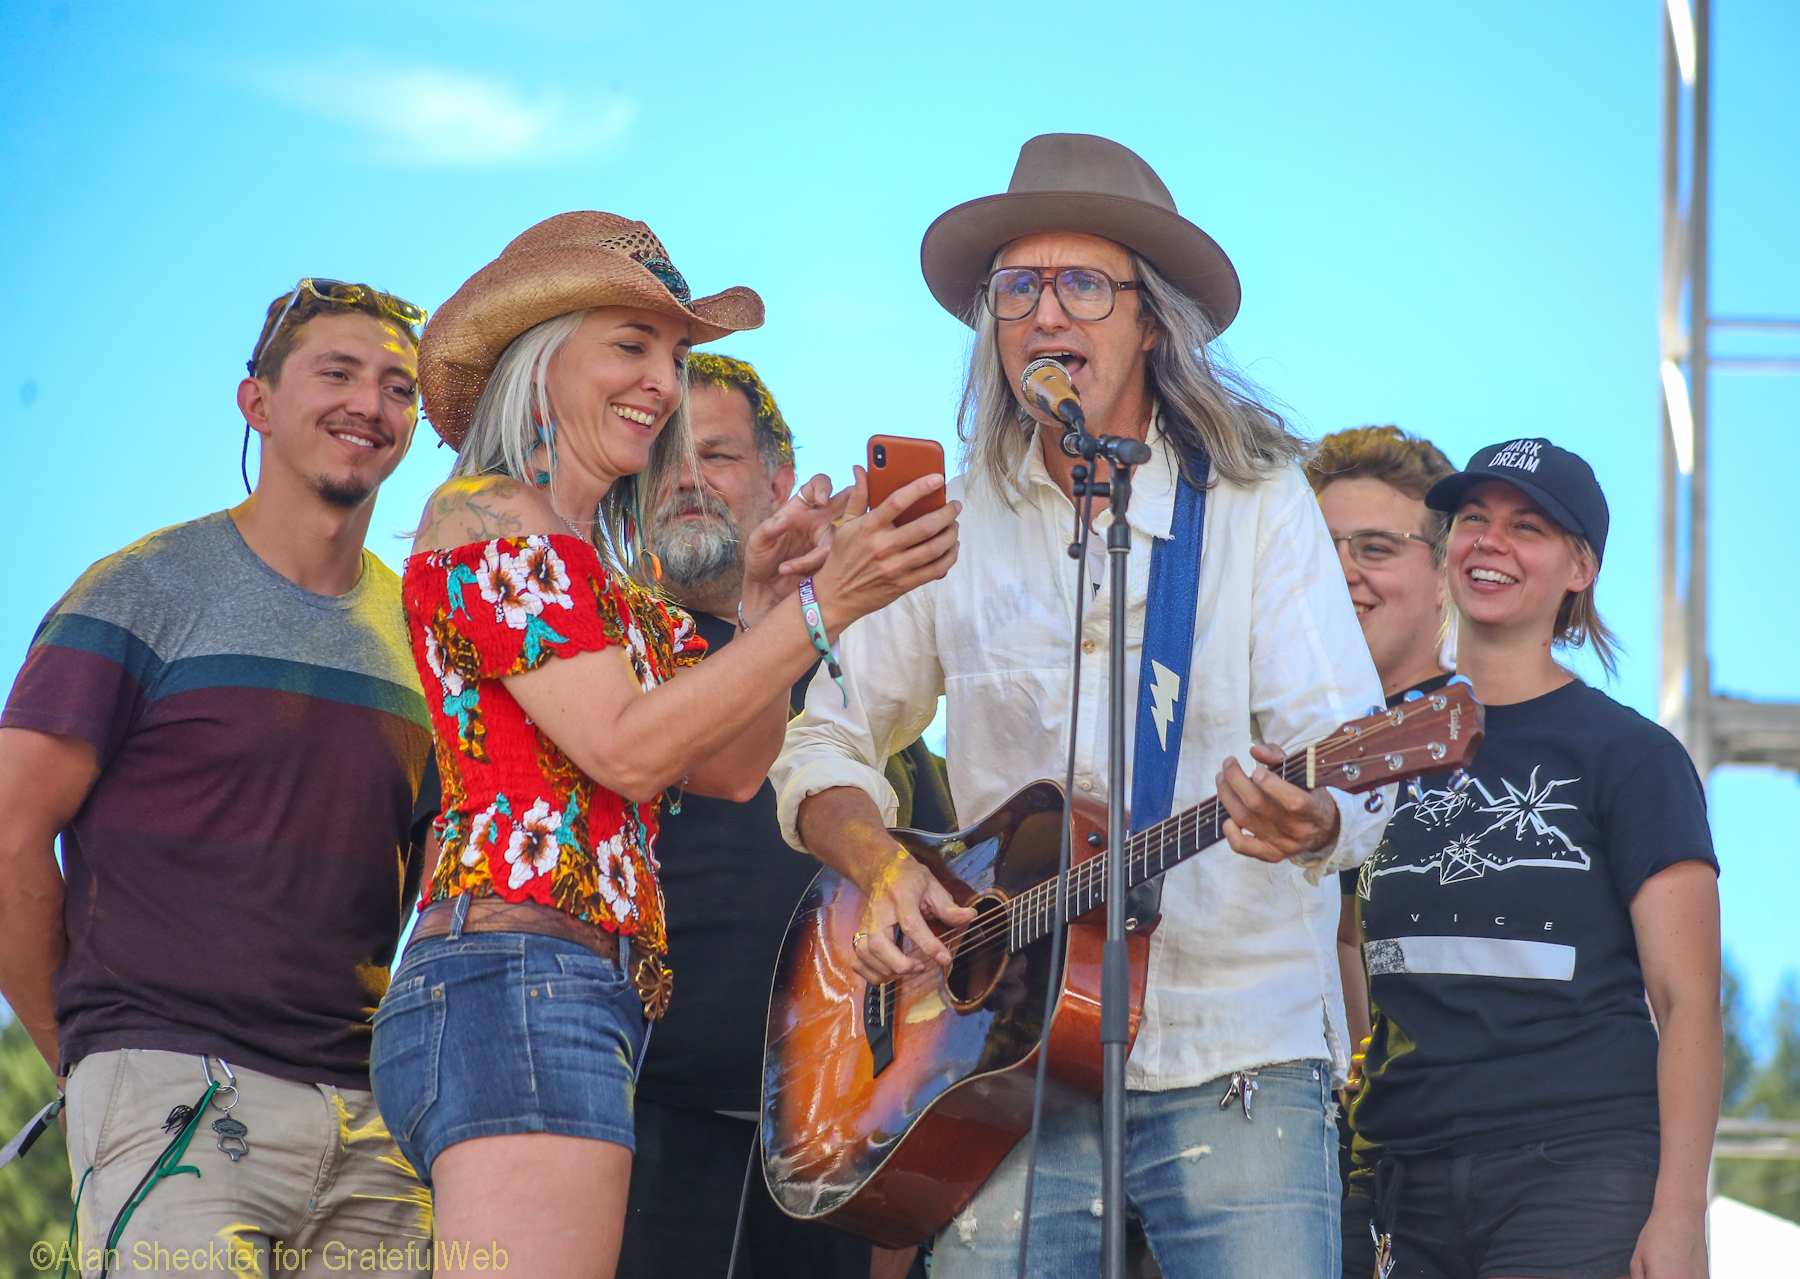 Steve Poltz, Paige Clem and High Sierra crew in a sing-along